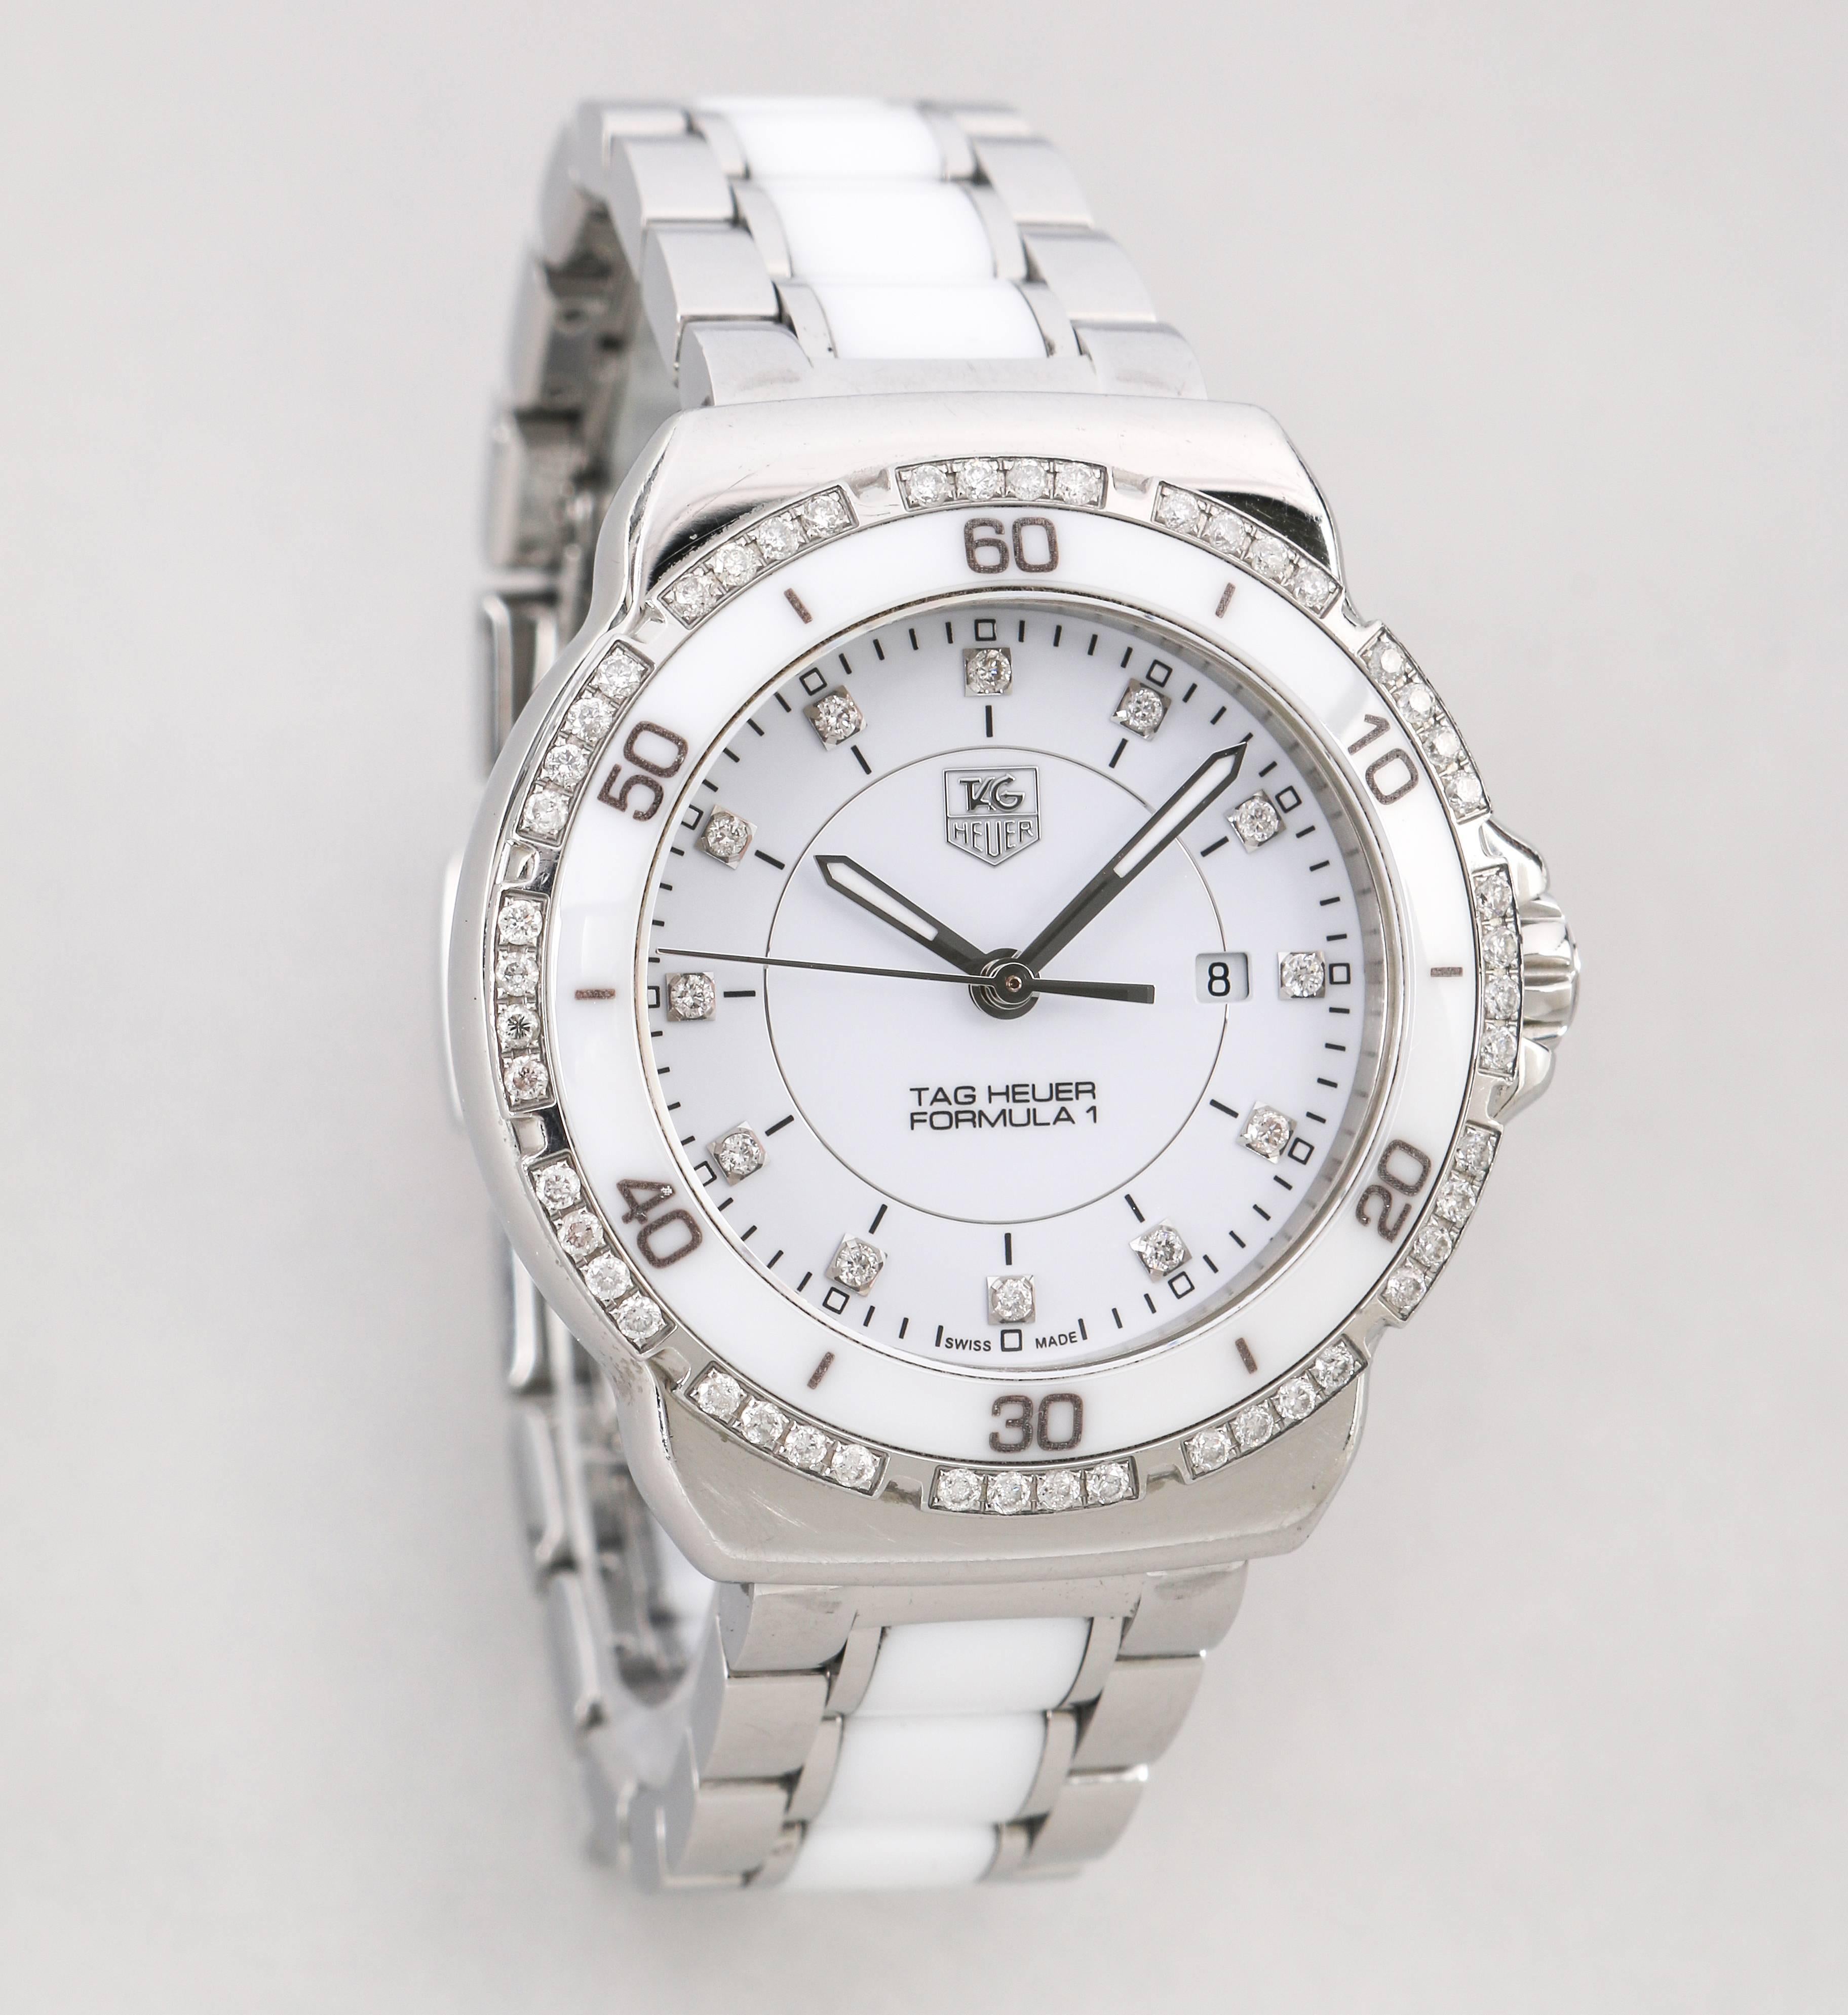 Authentic Swiss made Tag Heuer Ladies Formula 1 White Dial Diamond Stainless steel Ceramic Chronograph Watch. Bezel is stainless steel and ceramic encrusted with diamonds. Diamond indexes illuminate each hour. 60 diamonds total. Case is stainless